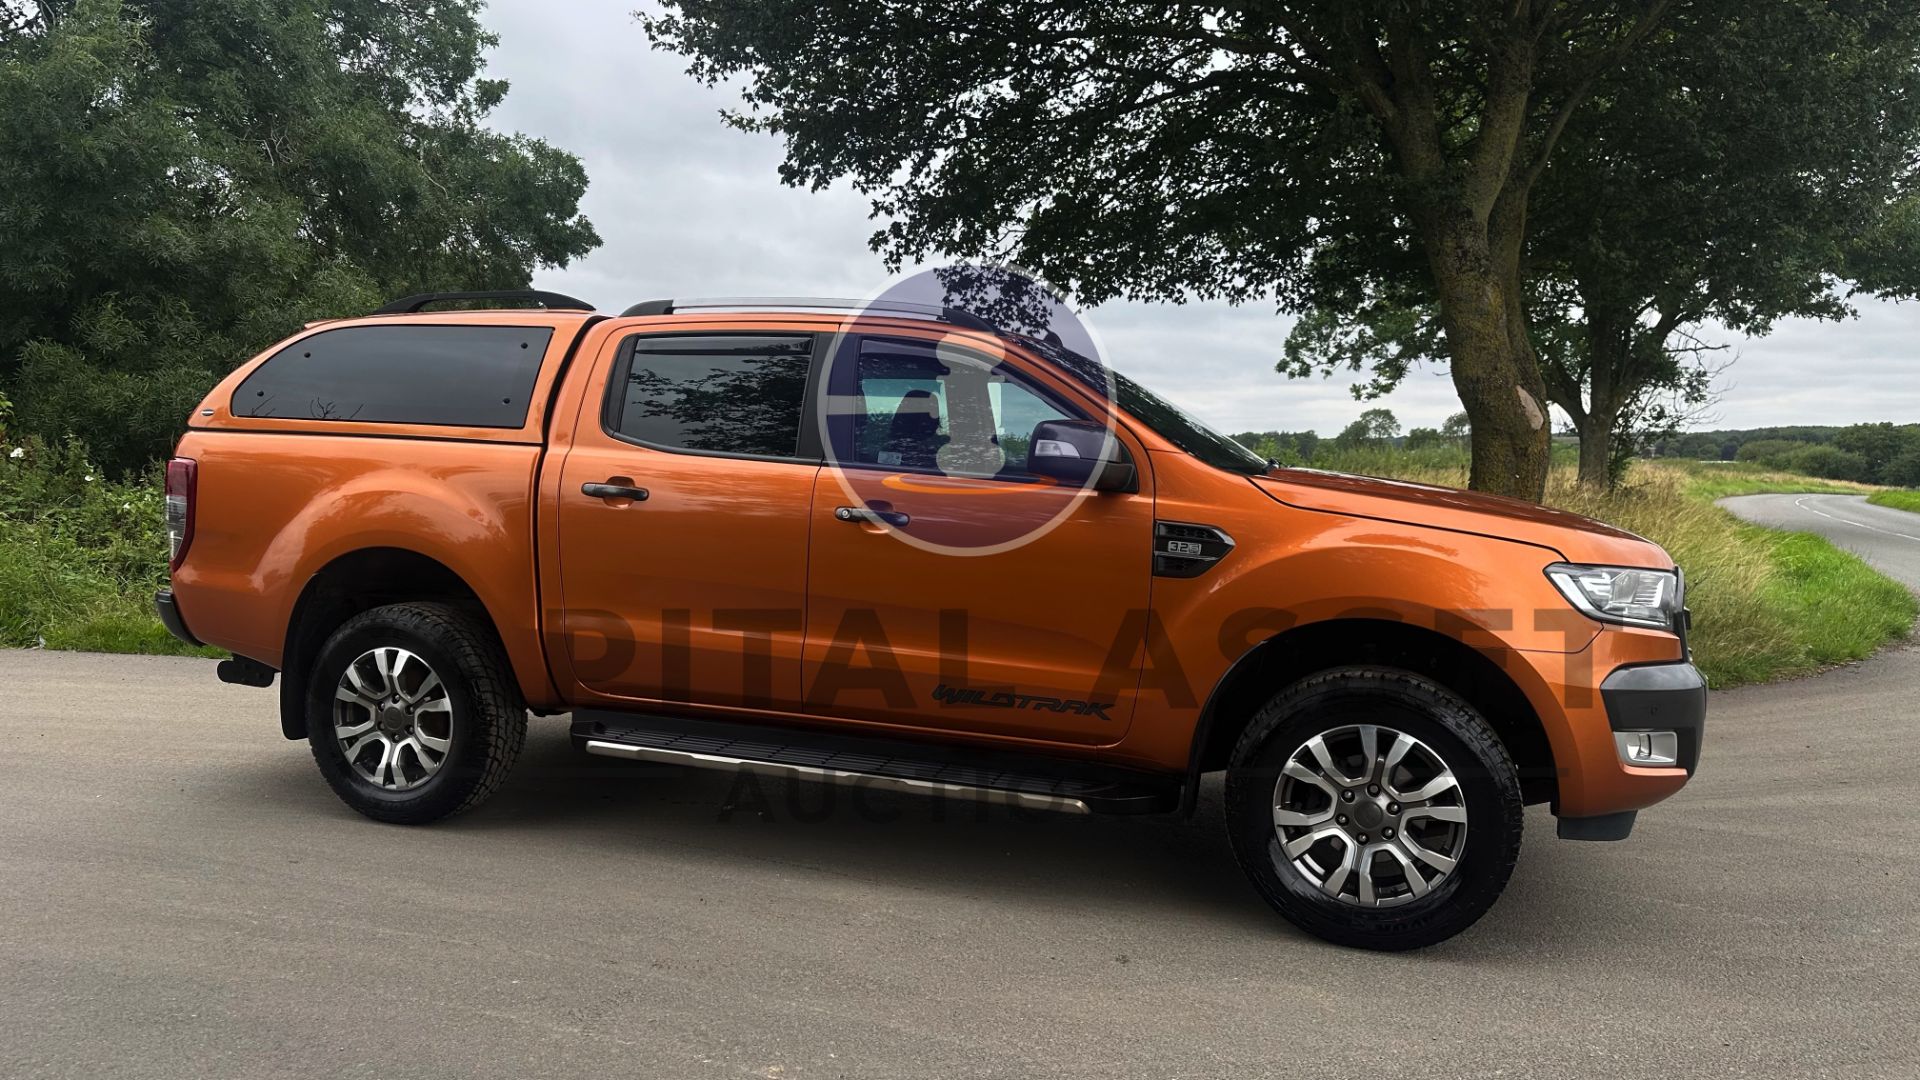 (ON SALE) FORD RANGER *WILDTRAK EDITION* DOUBLE CAB PICK-UP (2019 - EURO 6) 3.2 TDCI - AUTOMATIC